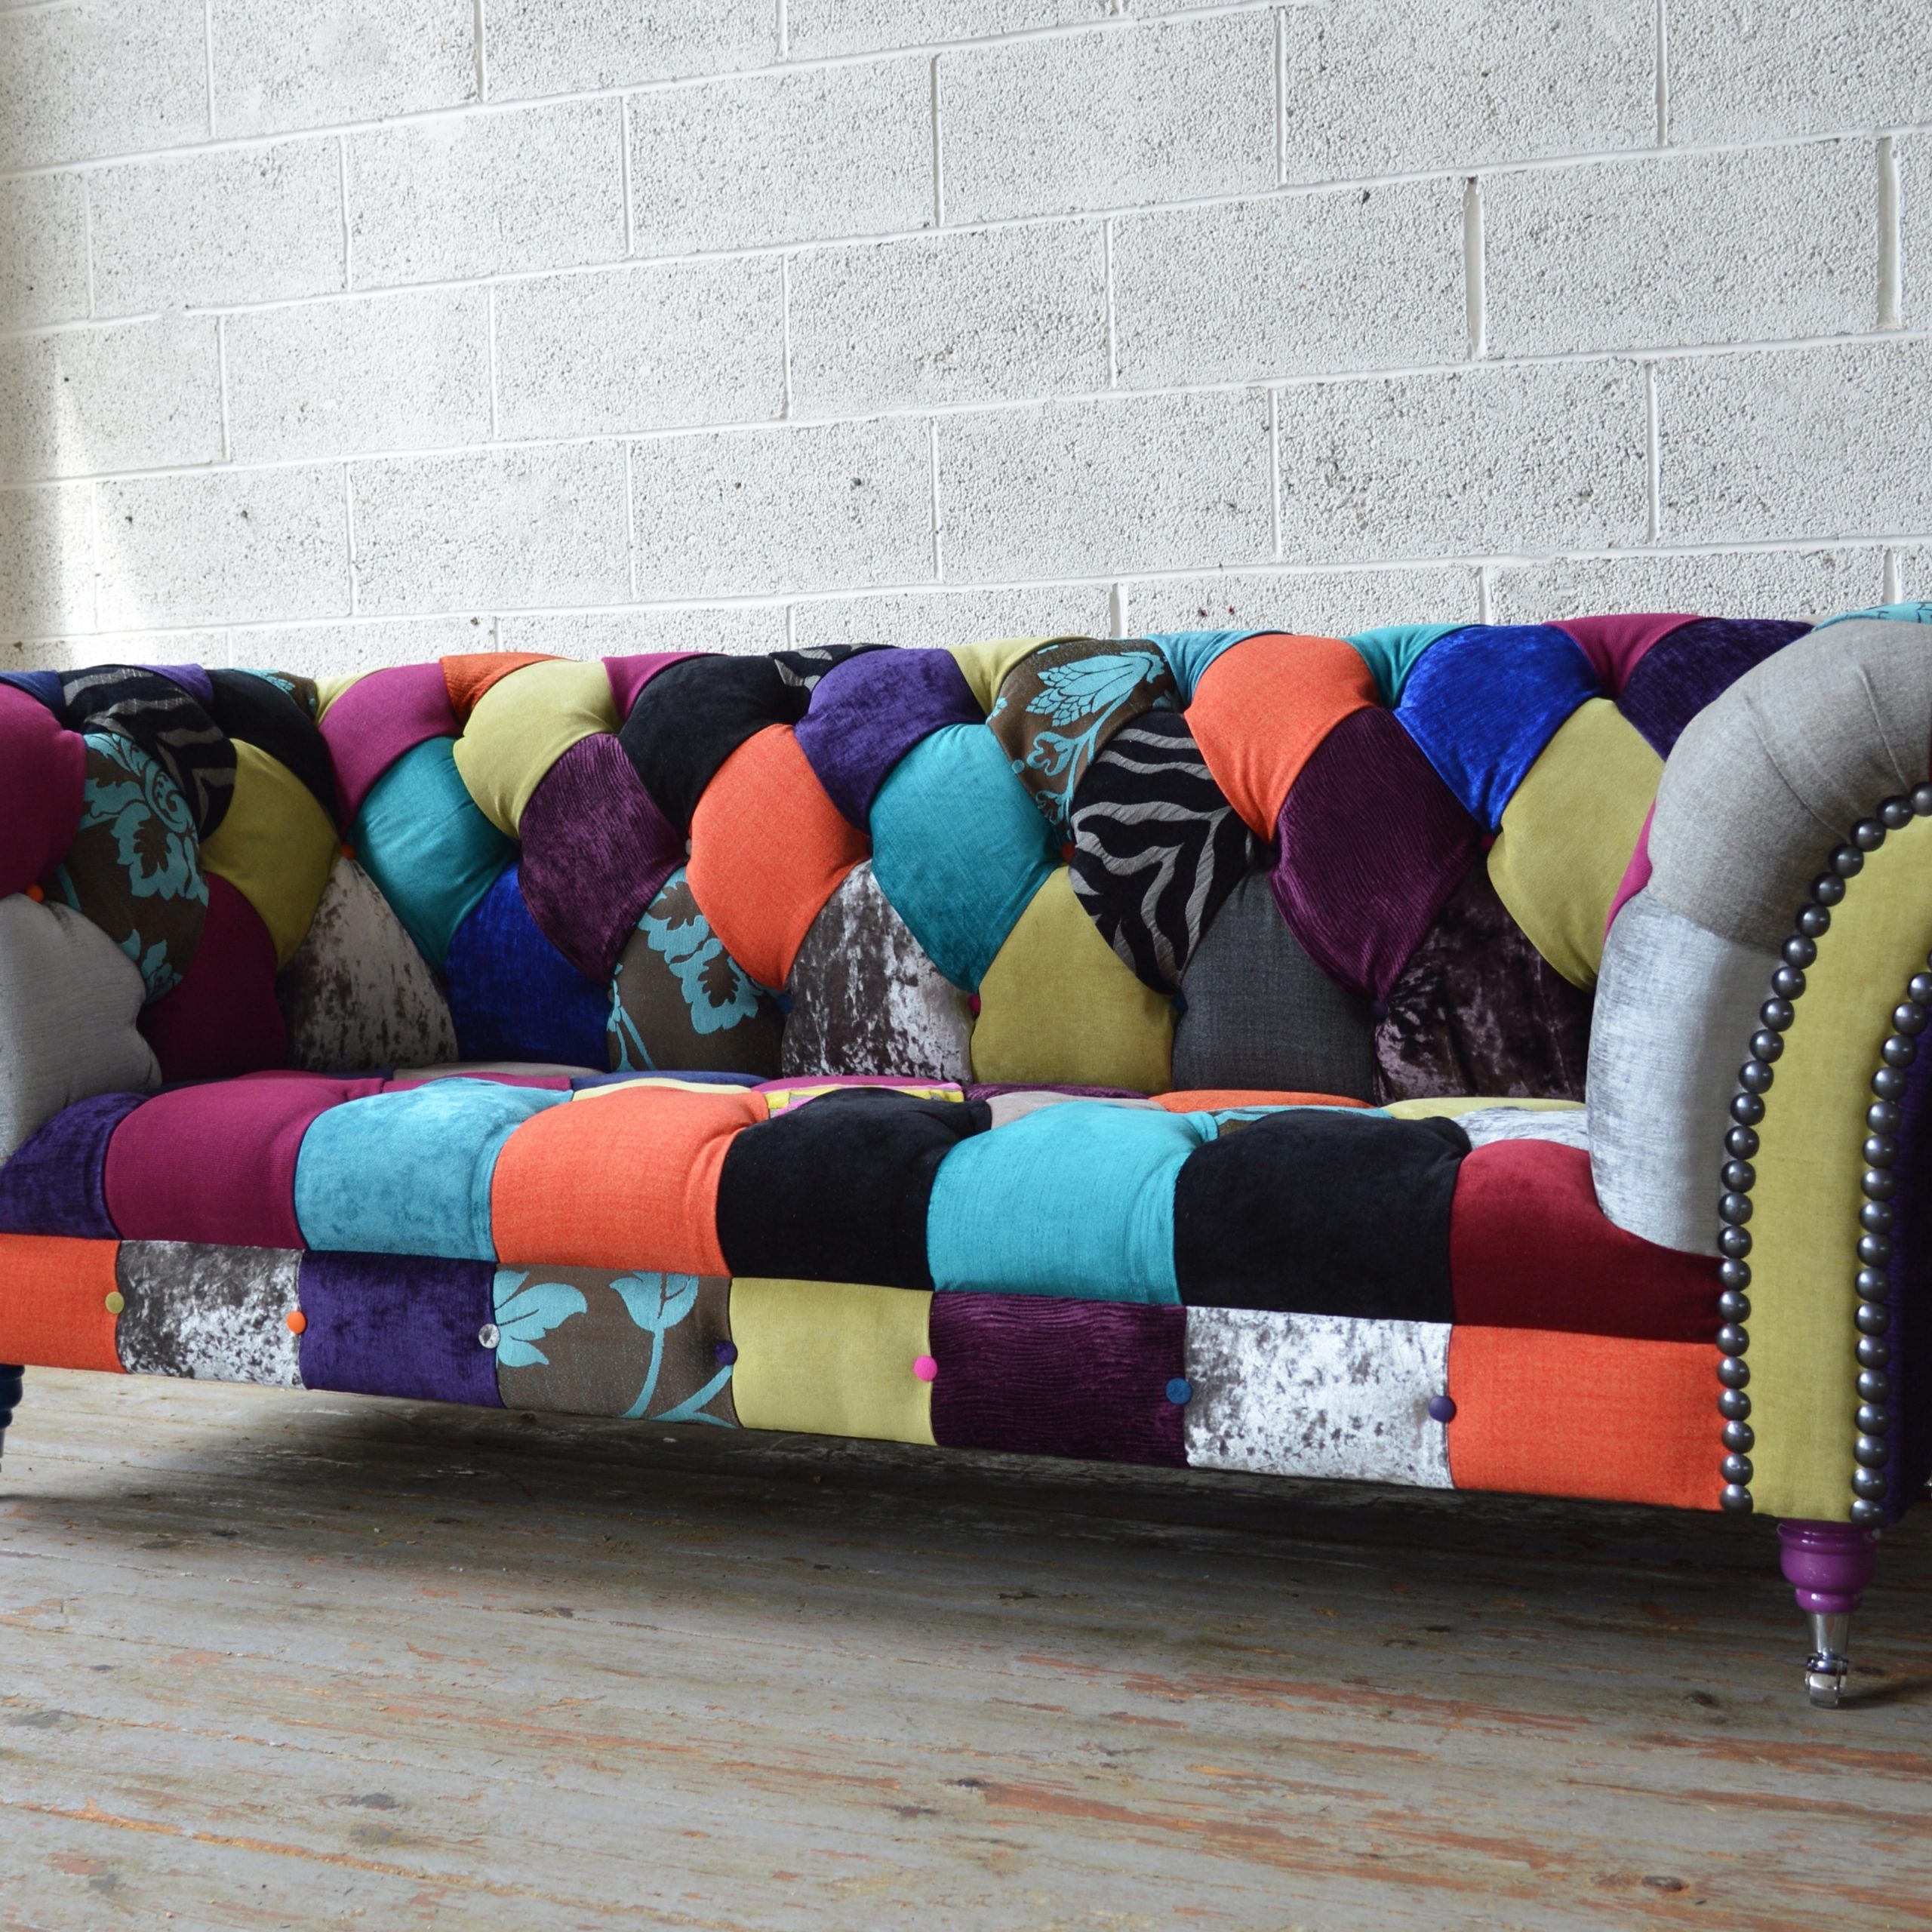 7 Images Multi Coloured Sofas And Review – Alqu Blog For Fashionable Sofas In Multiple Colors (View 14 of 15)